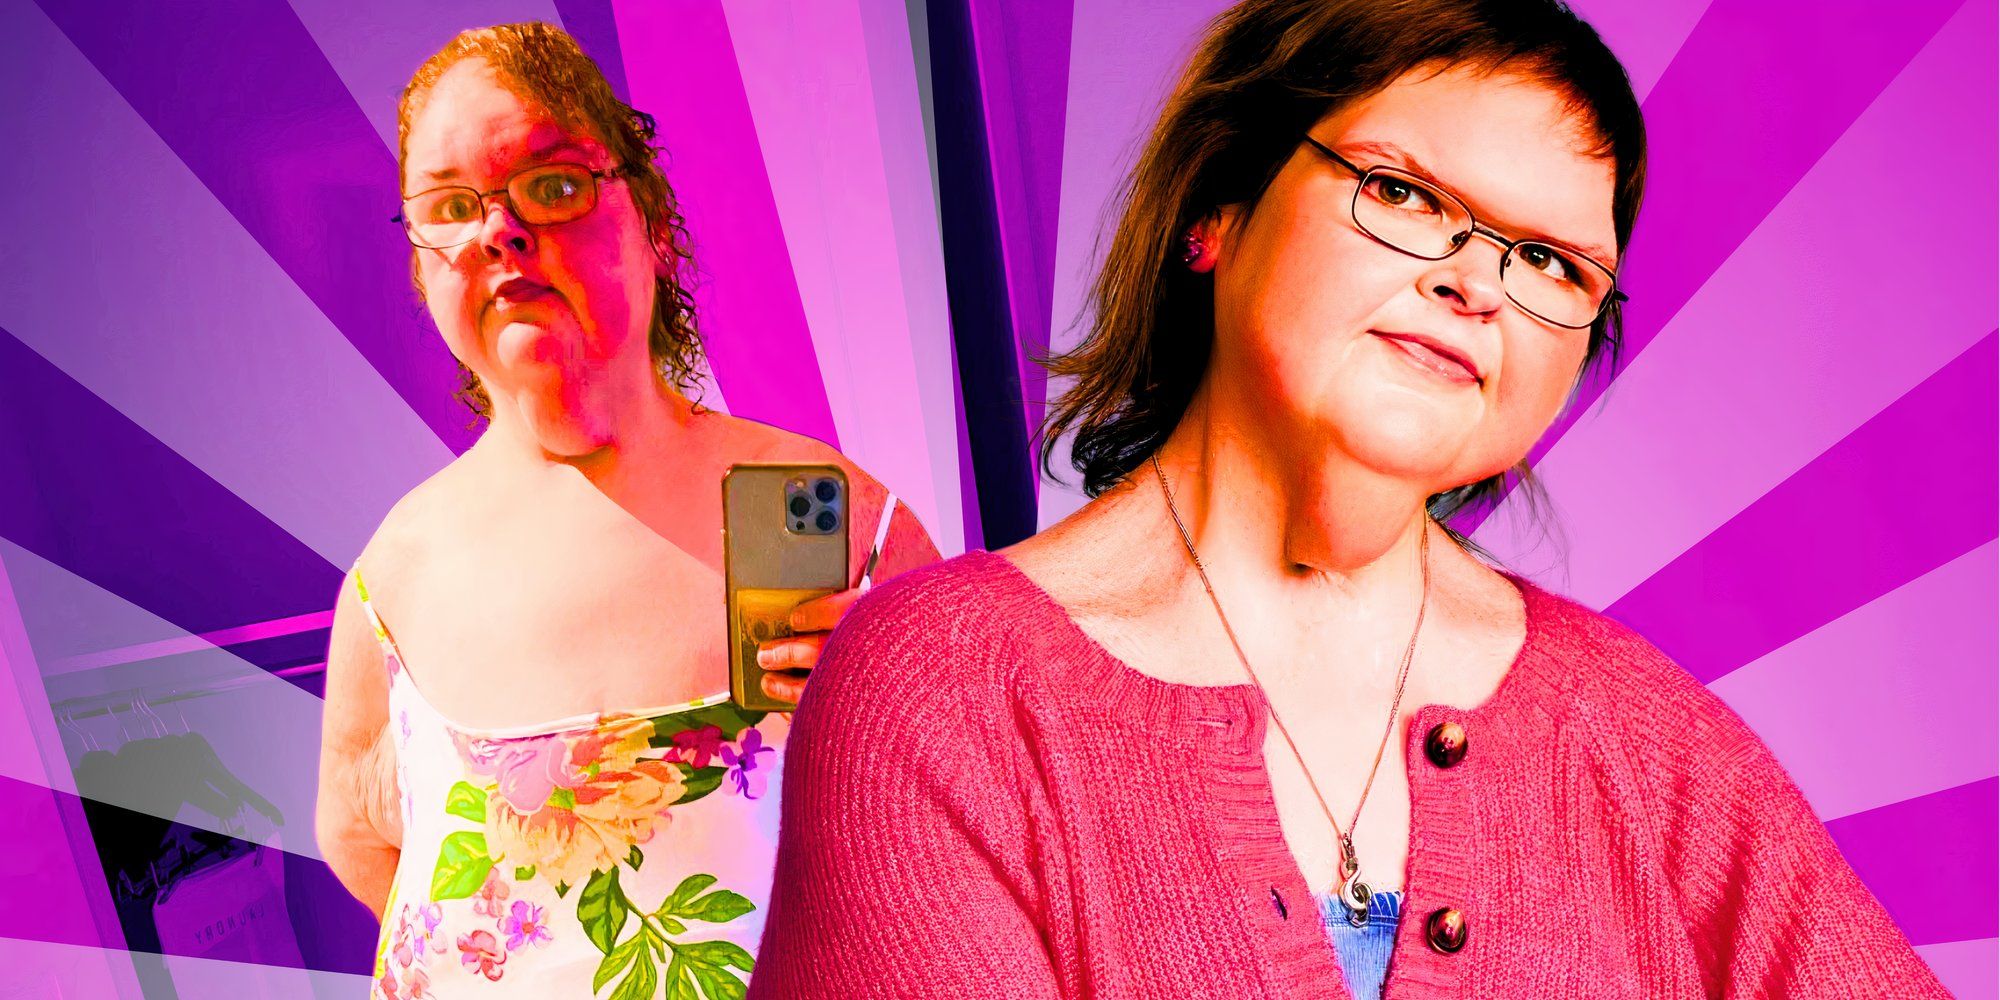 tammy slaton from 1000 lb sisters wearing feminine outfits in montage with purple background-1